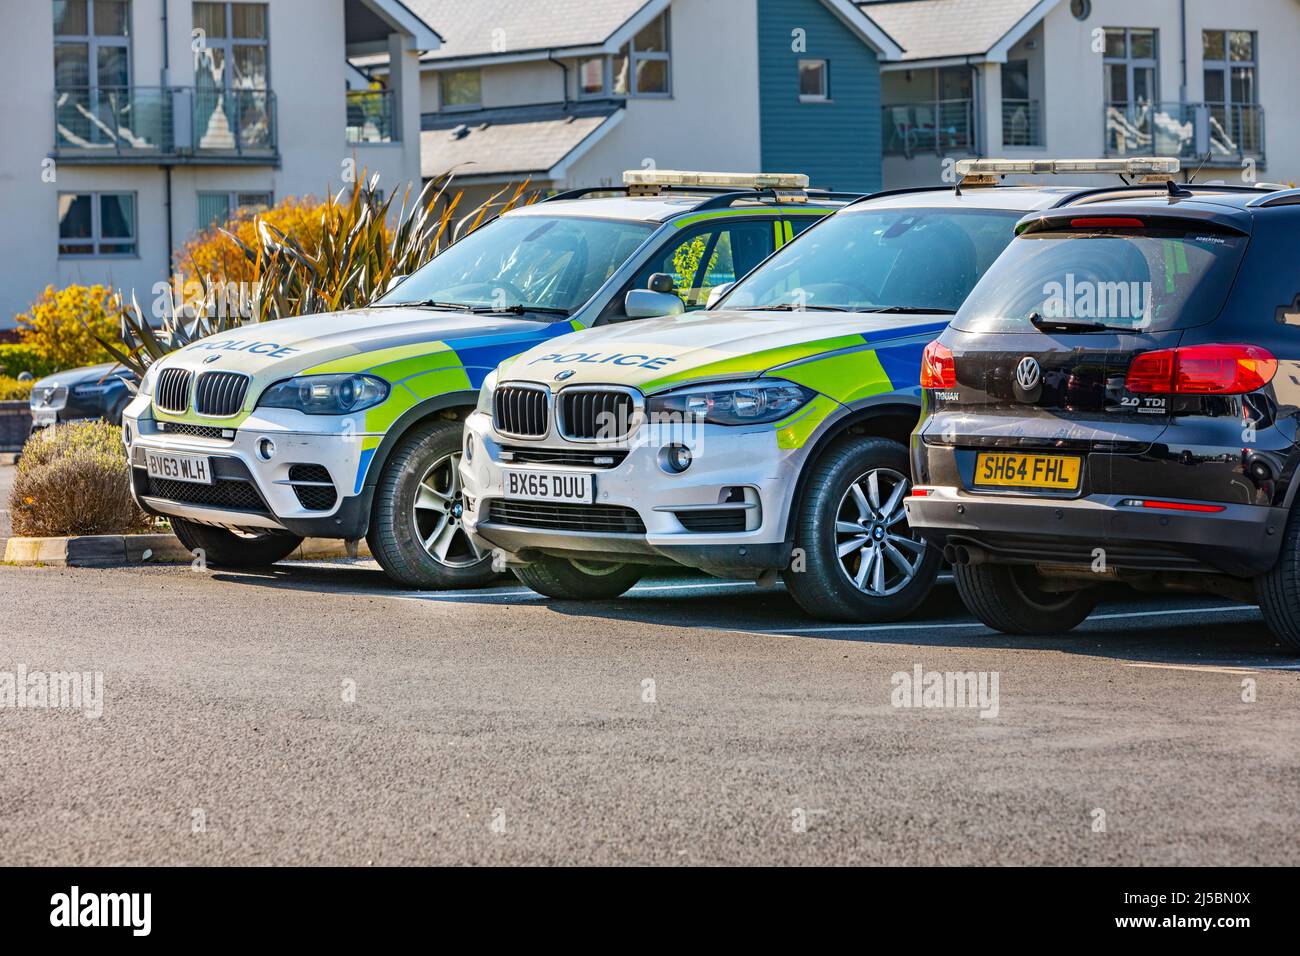 Two BMW police cars parked in a car park Stock Photo